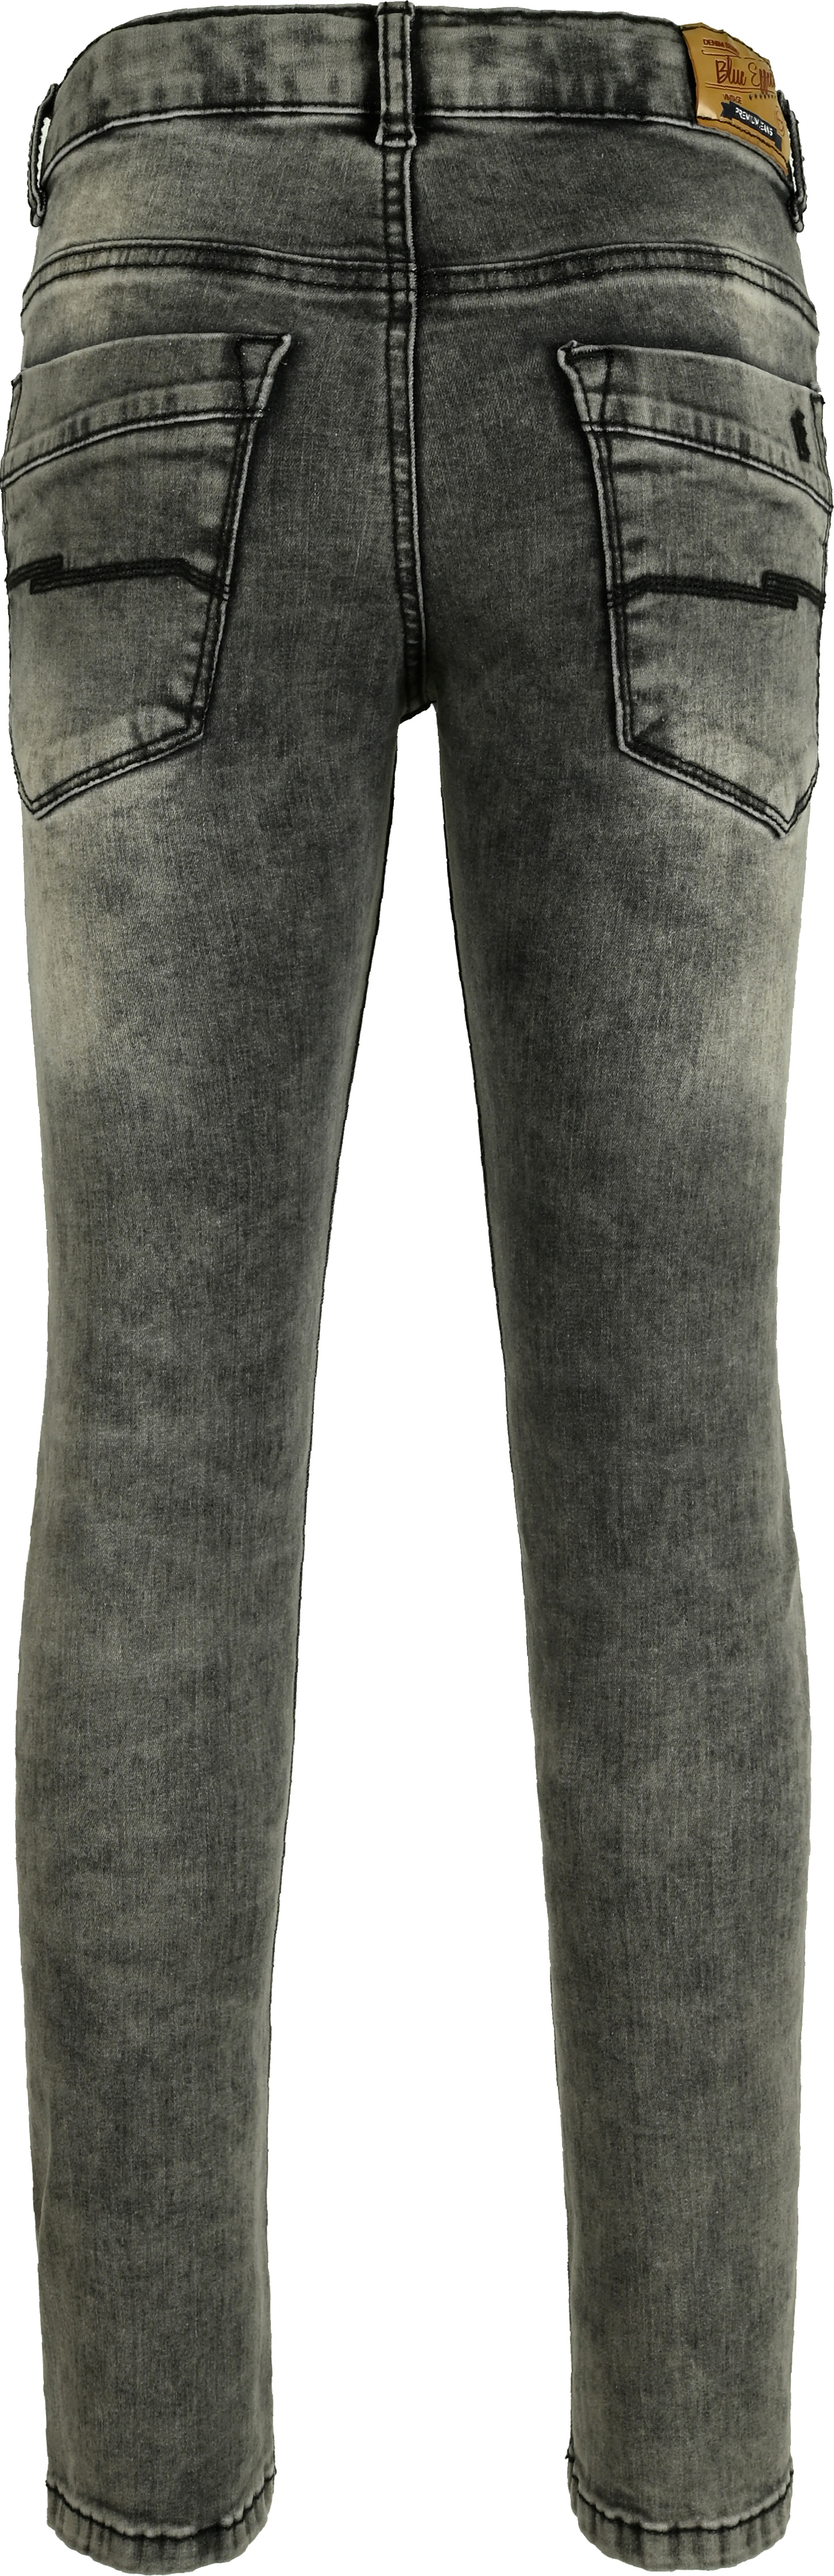 2833-Boys Relaxed Fit Jeans Ultrastretch, verfügbar in Normal